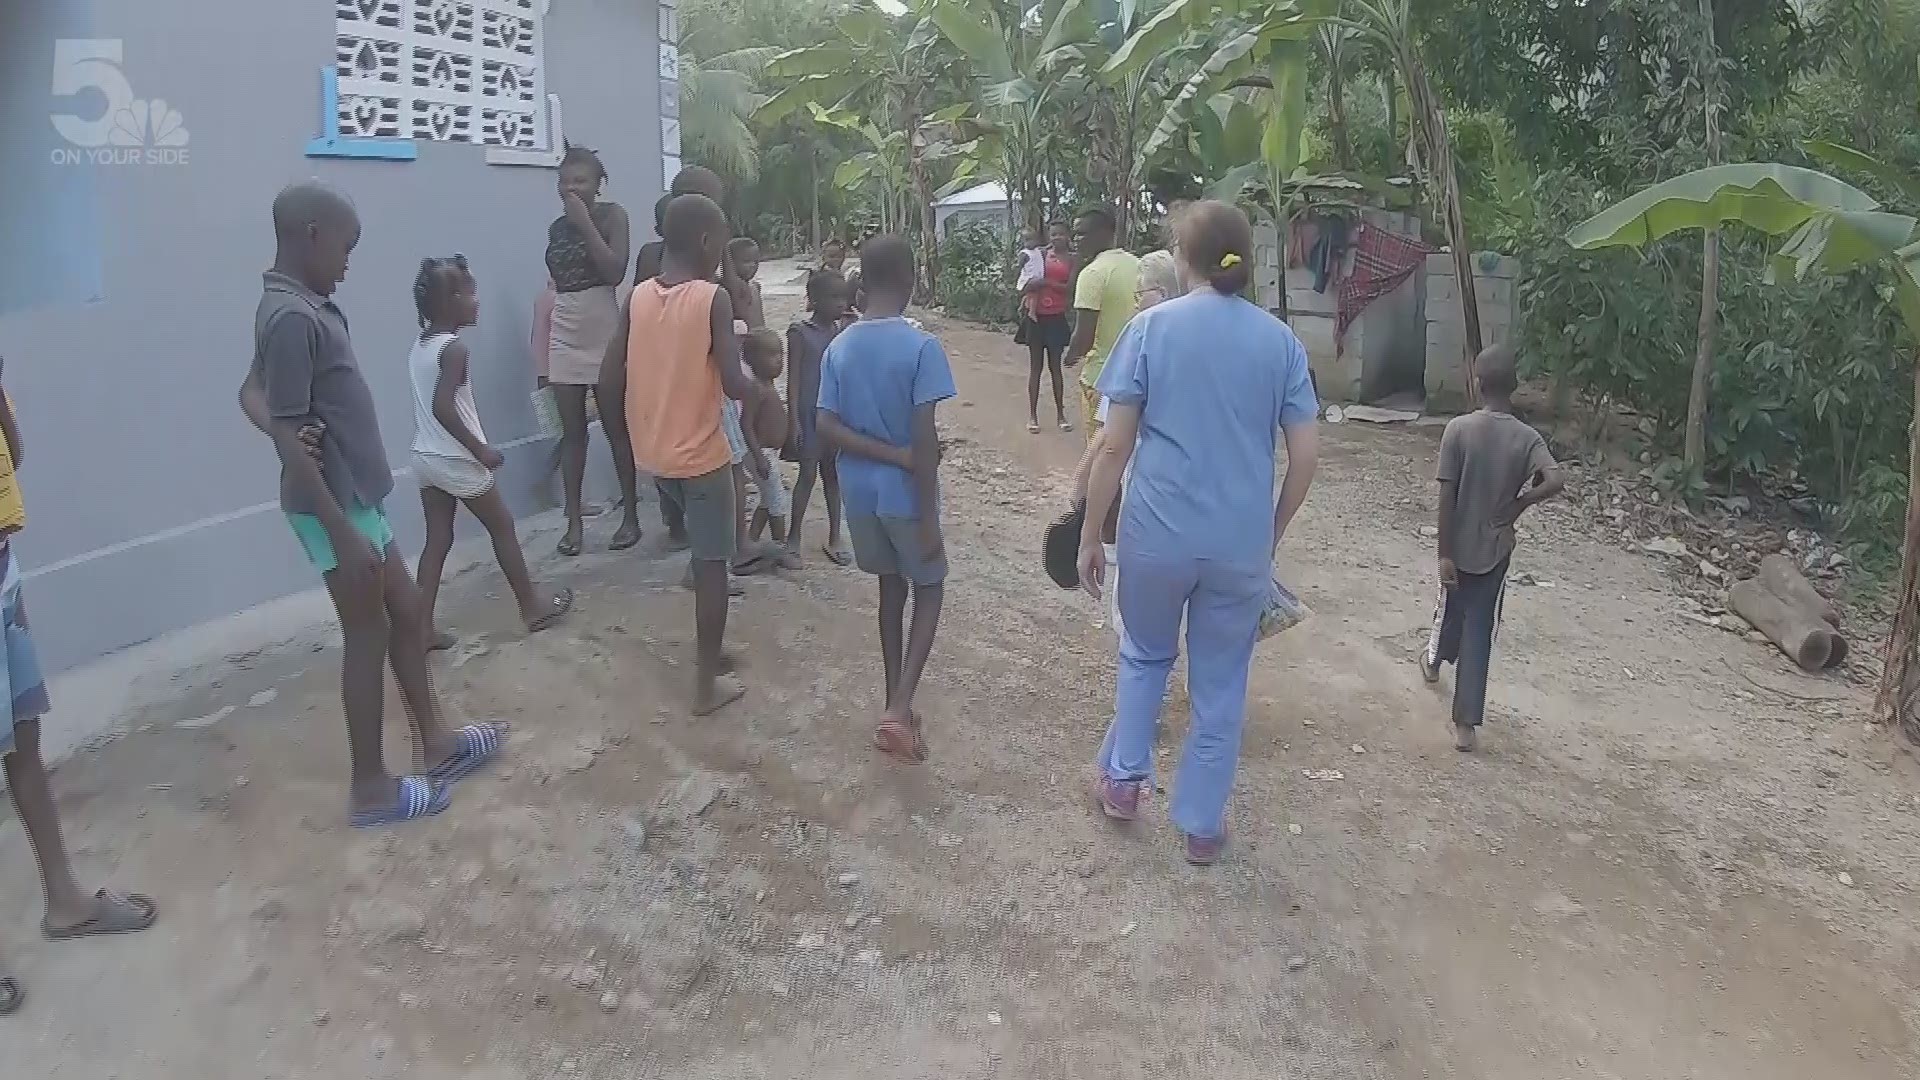 Sister Ann Crawley works at a mission in Milot, Haiti, and builds homes for blind and disabled Haitians. This video tells just a small part of her powerful story.